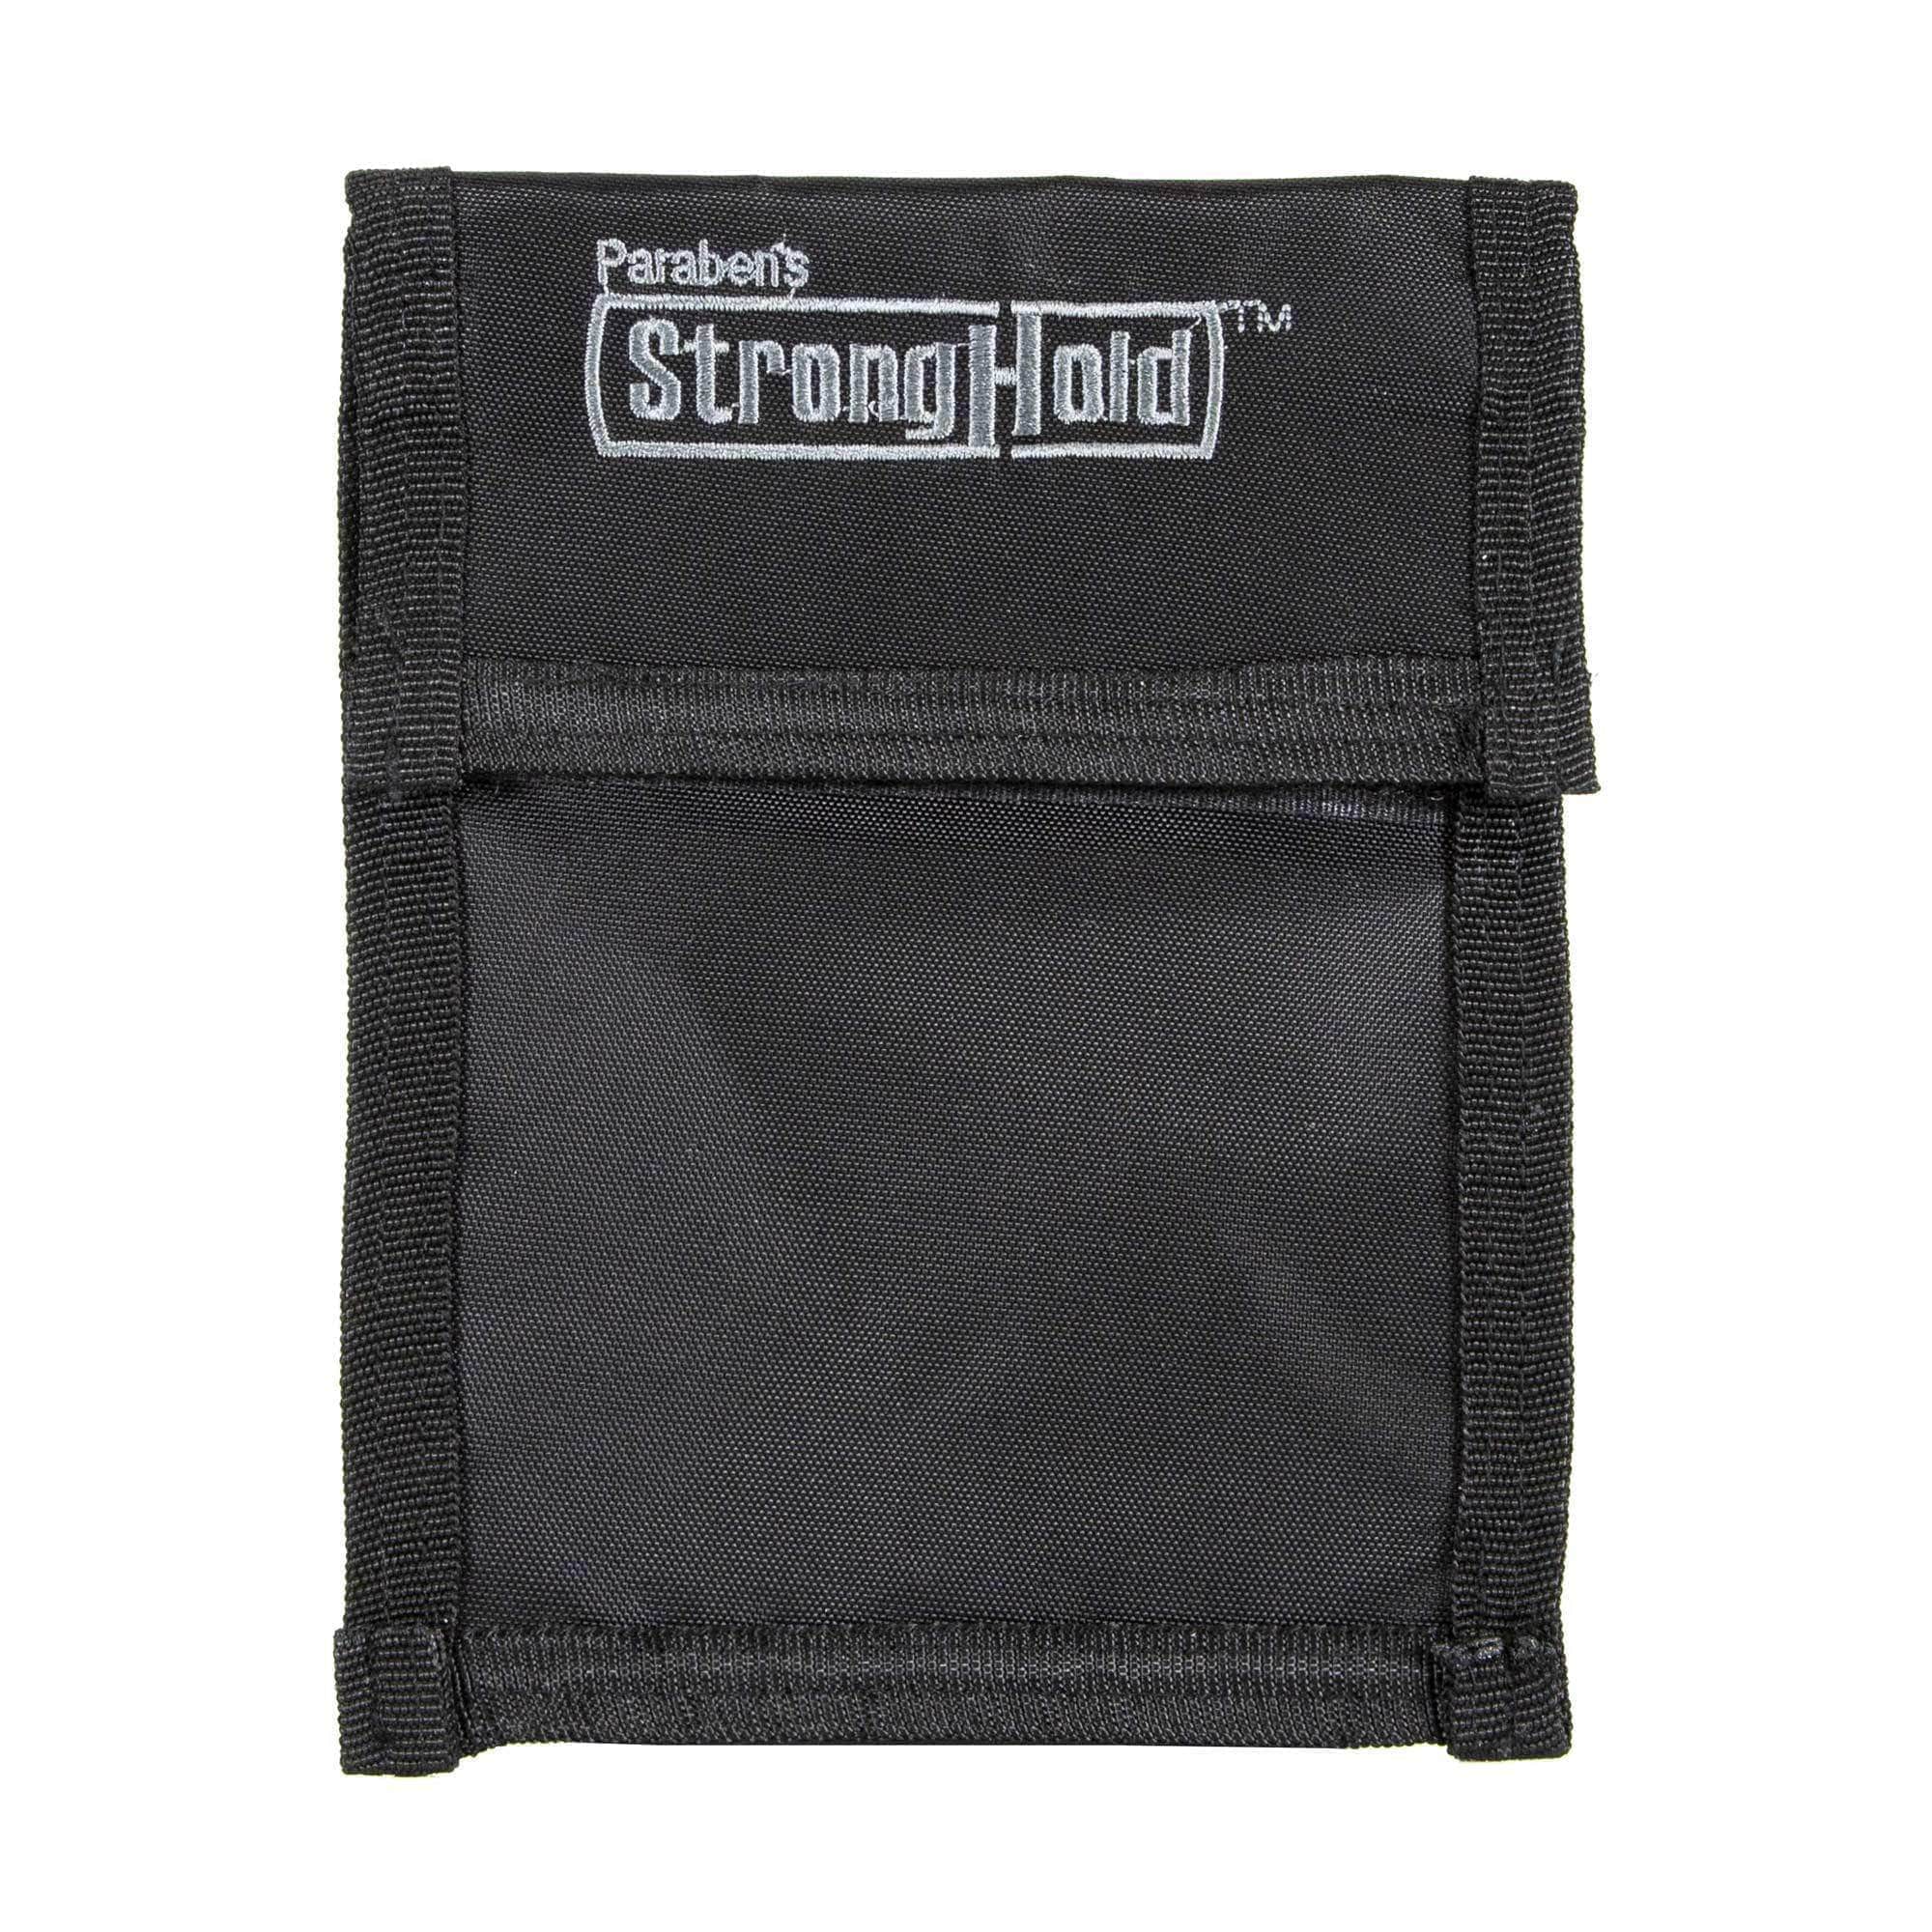 ID Stronghold Shielded Bag Phone Small Cell Phone Stronghold Bag 5"x6" - Black